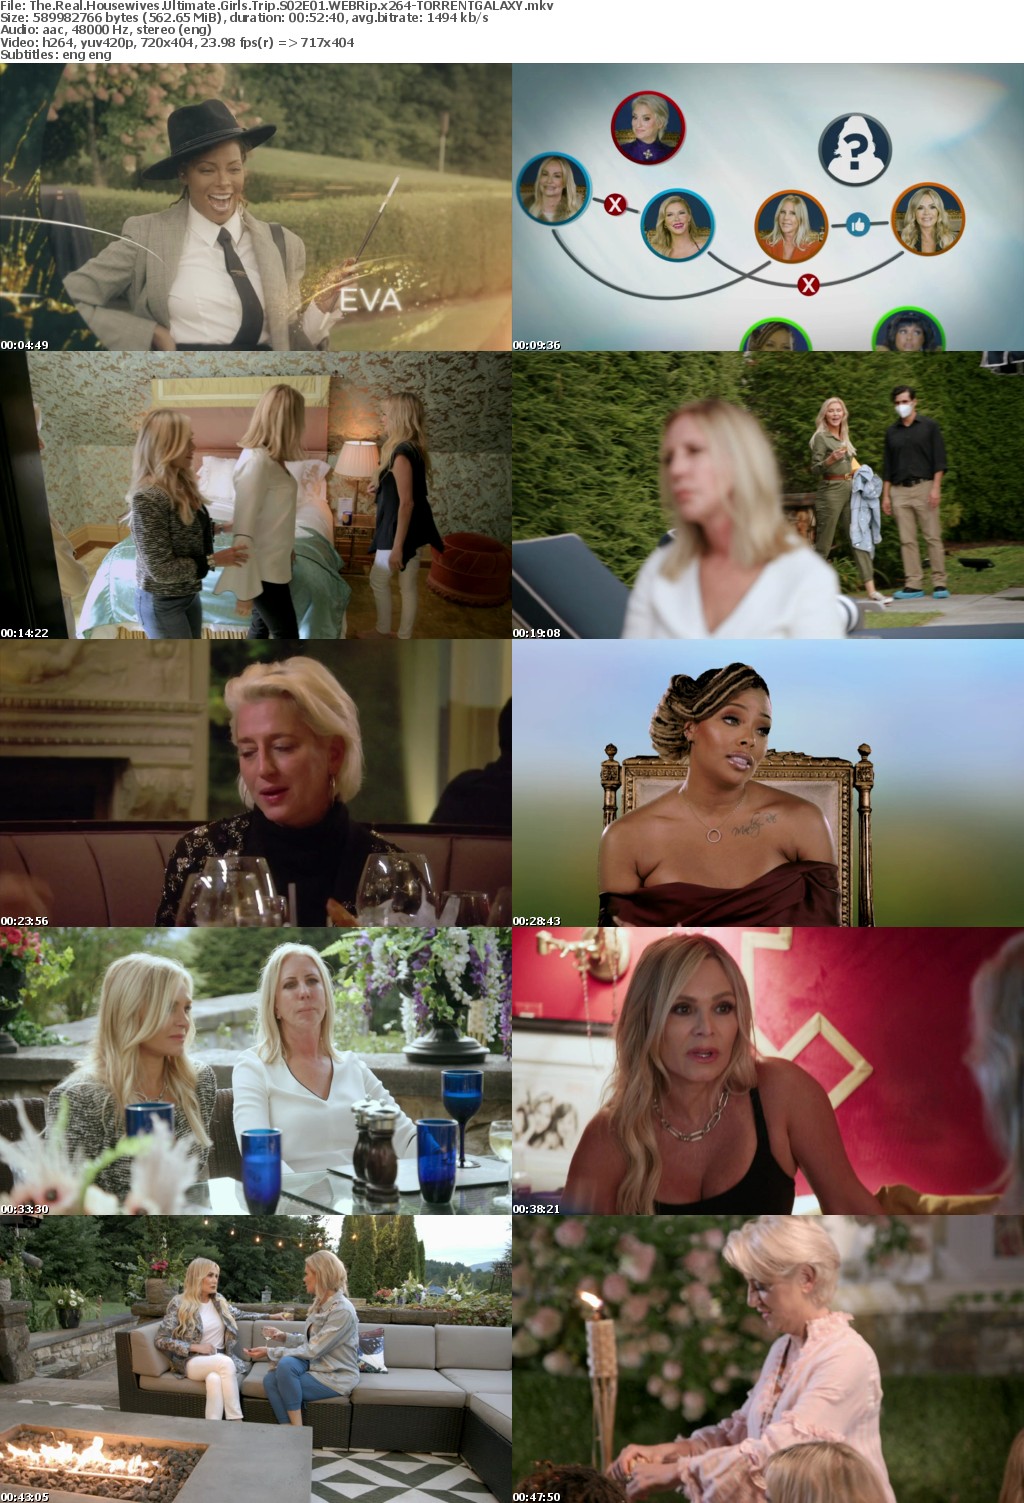 The Real Housewives Ultimate Girls Trip S02E01 WEBRip x264-GALAXY